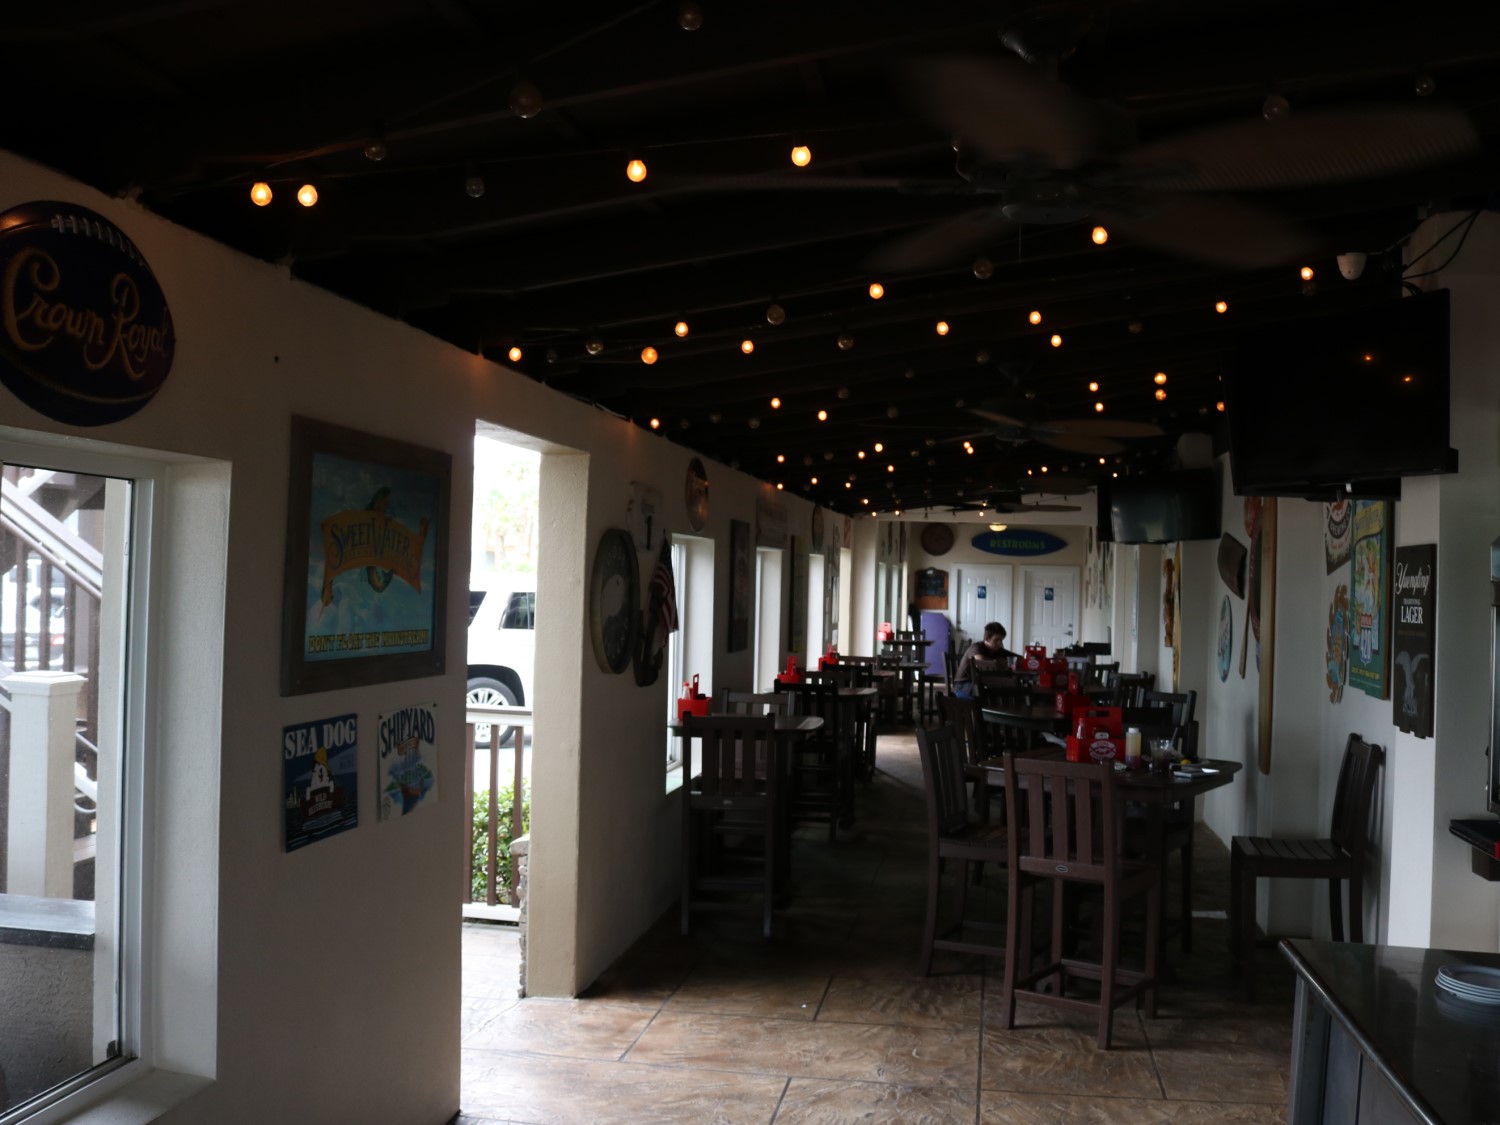 Oceanside Beach Bar and Grill Covered Patio